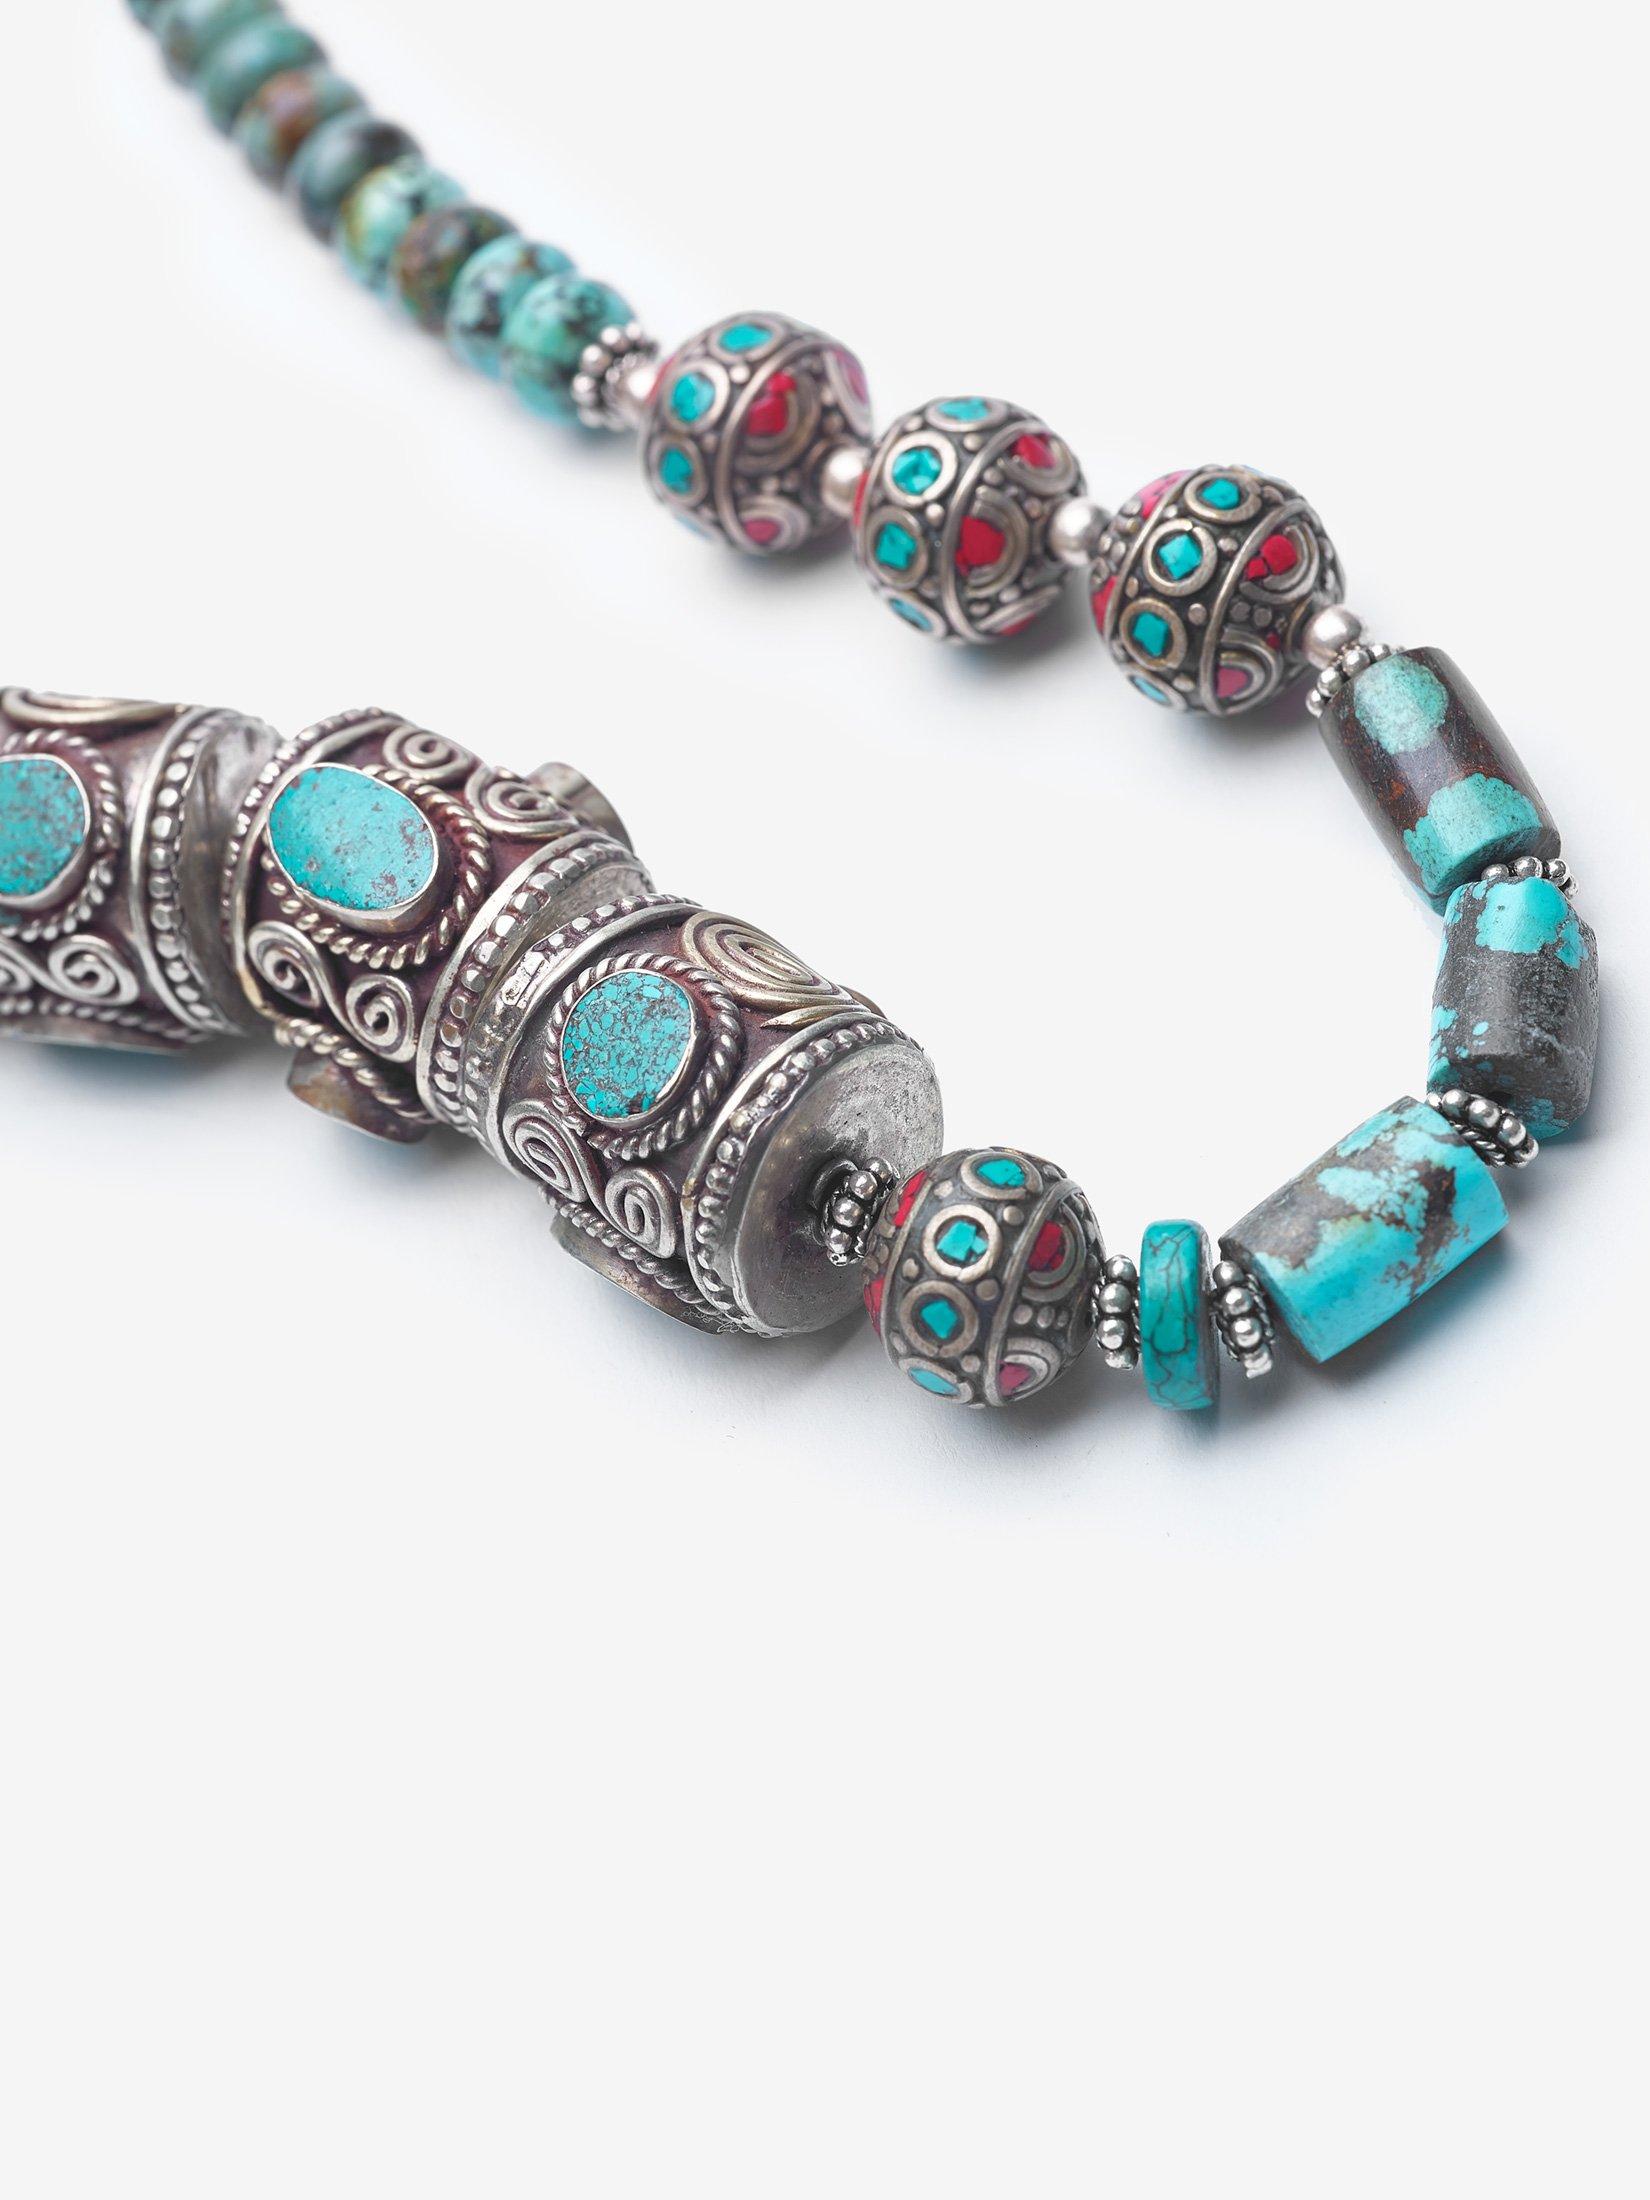 Behind the Jewelry
The unique necklace is crafted from ancient pieces from the Berber tribes outside of Marrakesh. Yamanda means beautiful in Arabic. The necklace is adorned with natural and African turquoise, which is one of the most recognized